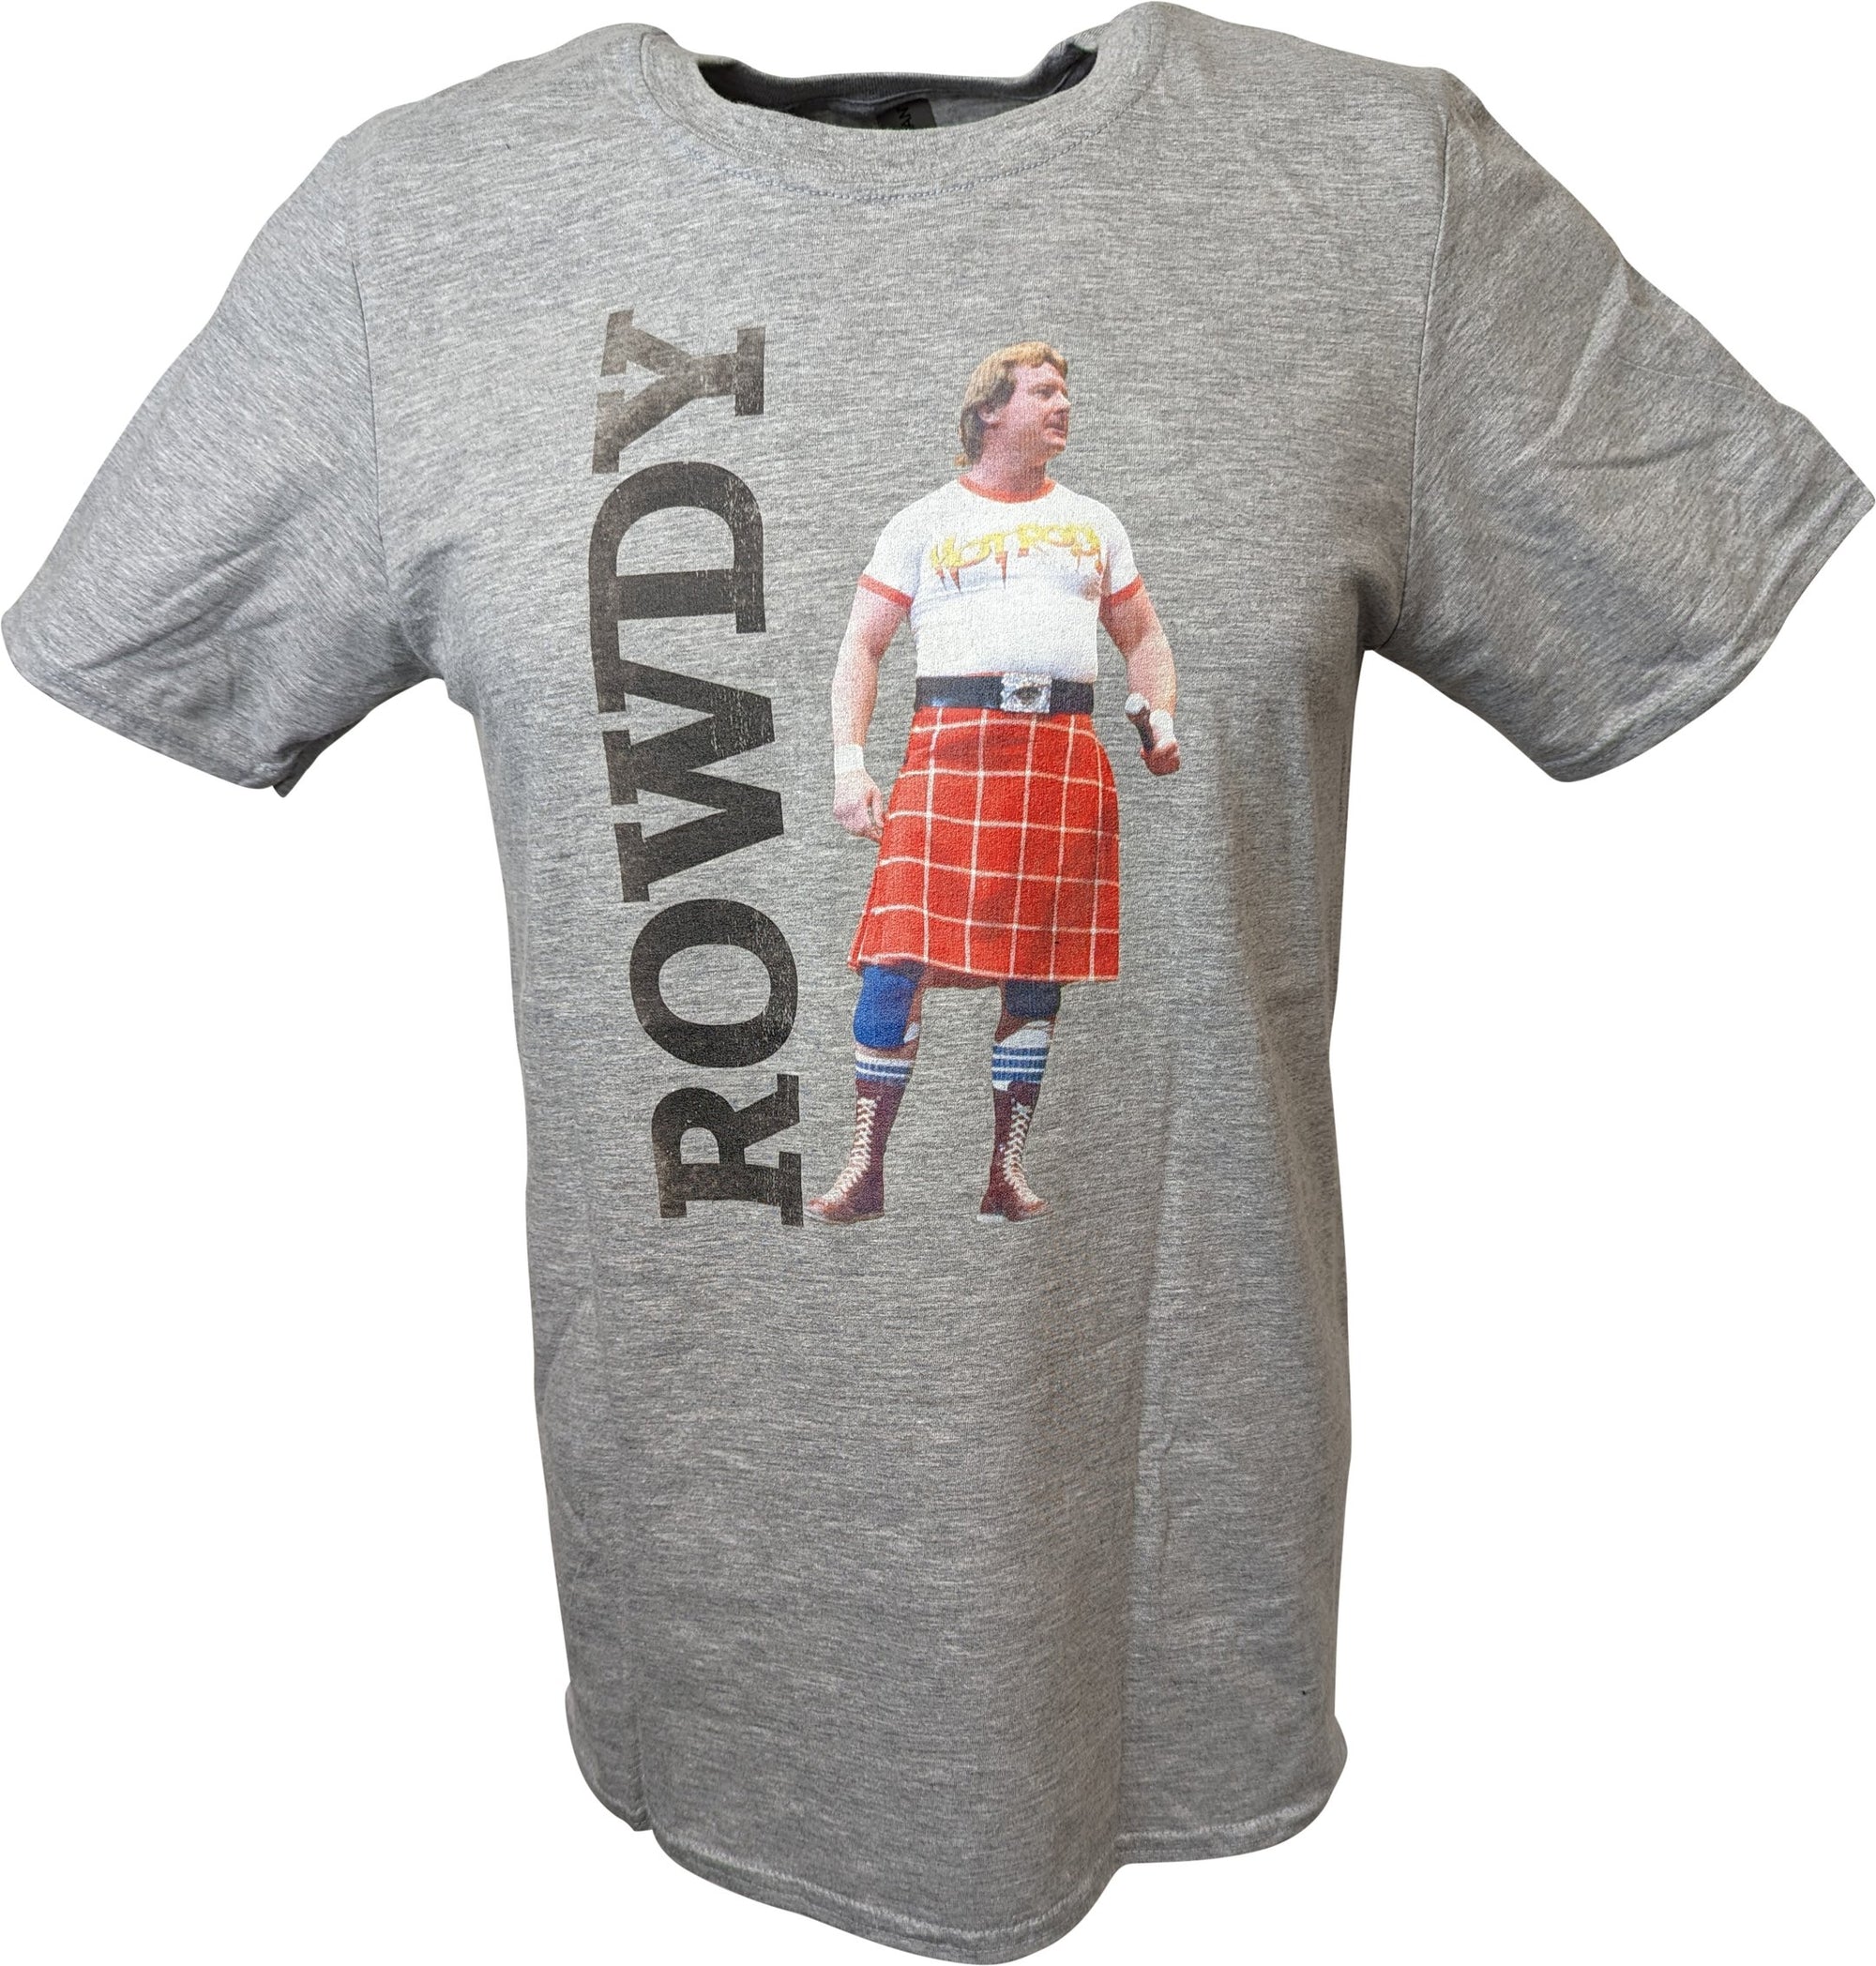 Rowdy Roddy Piper Legends Collection Mens Gray T-shirt